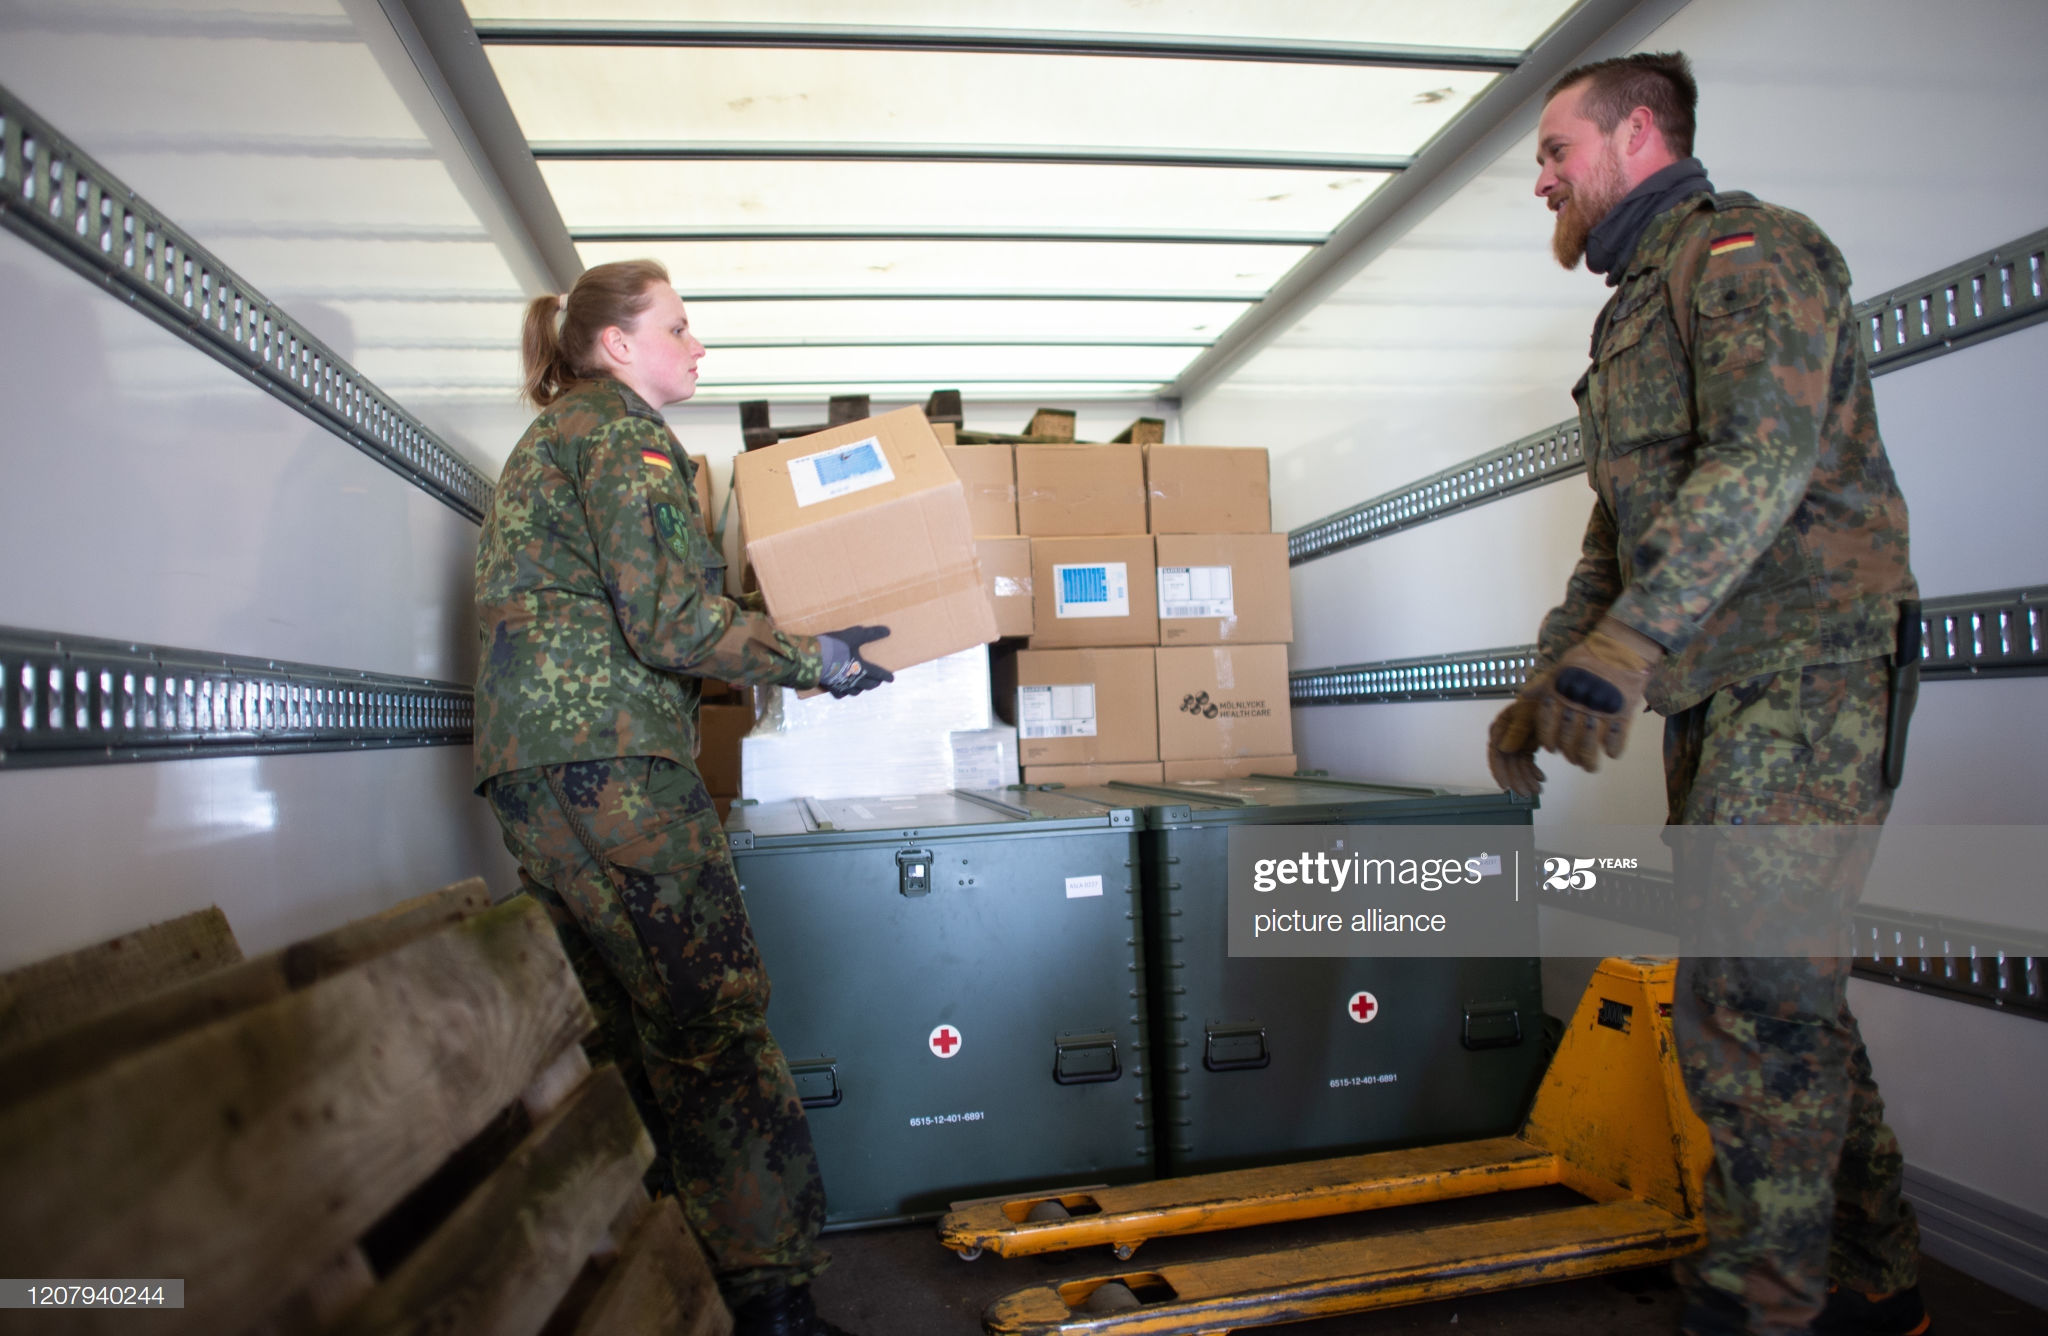 march-2020-north-rhinewestphalia-erkelenz-soldiers-are-loading-boxes-picture-id1207940244